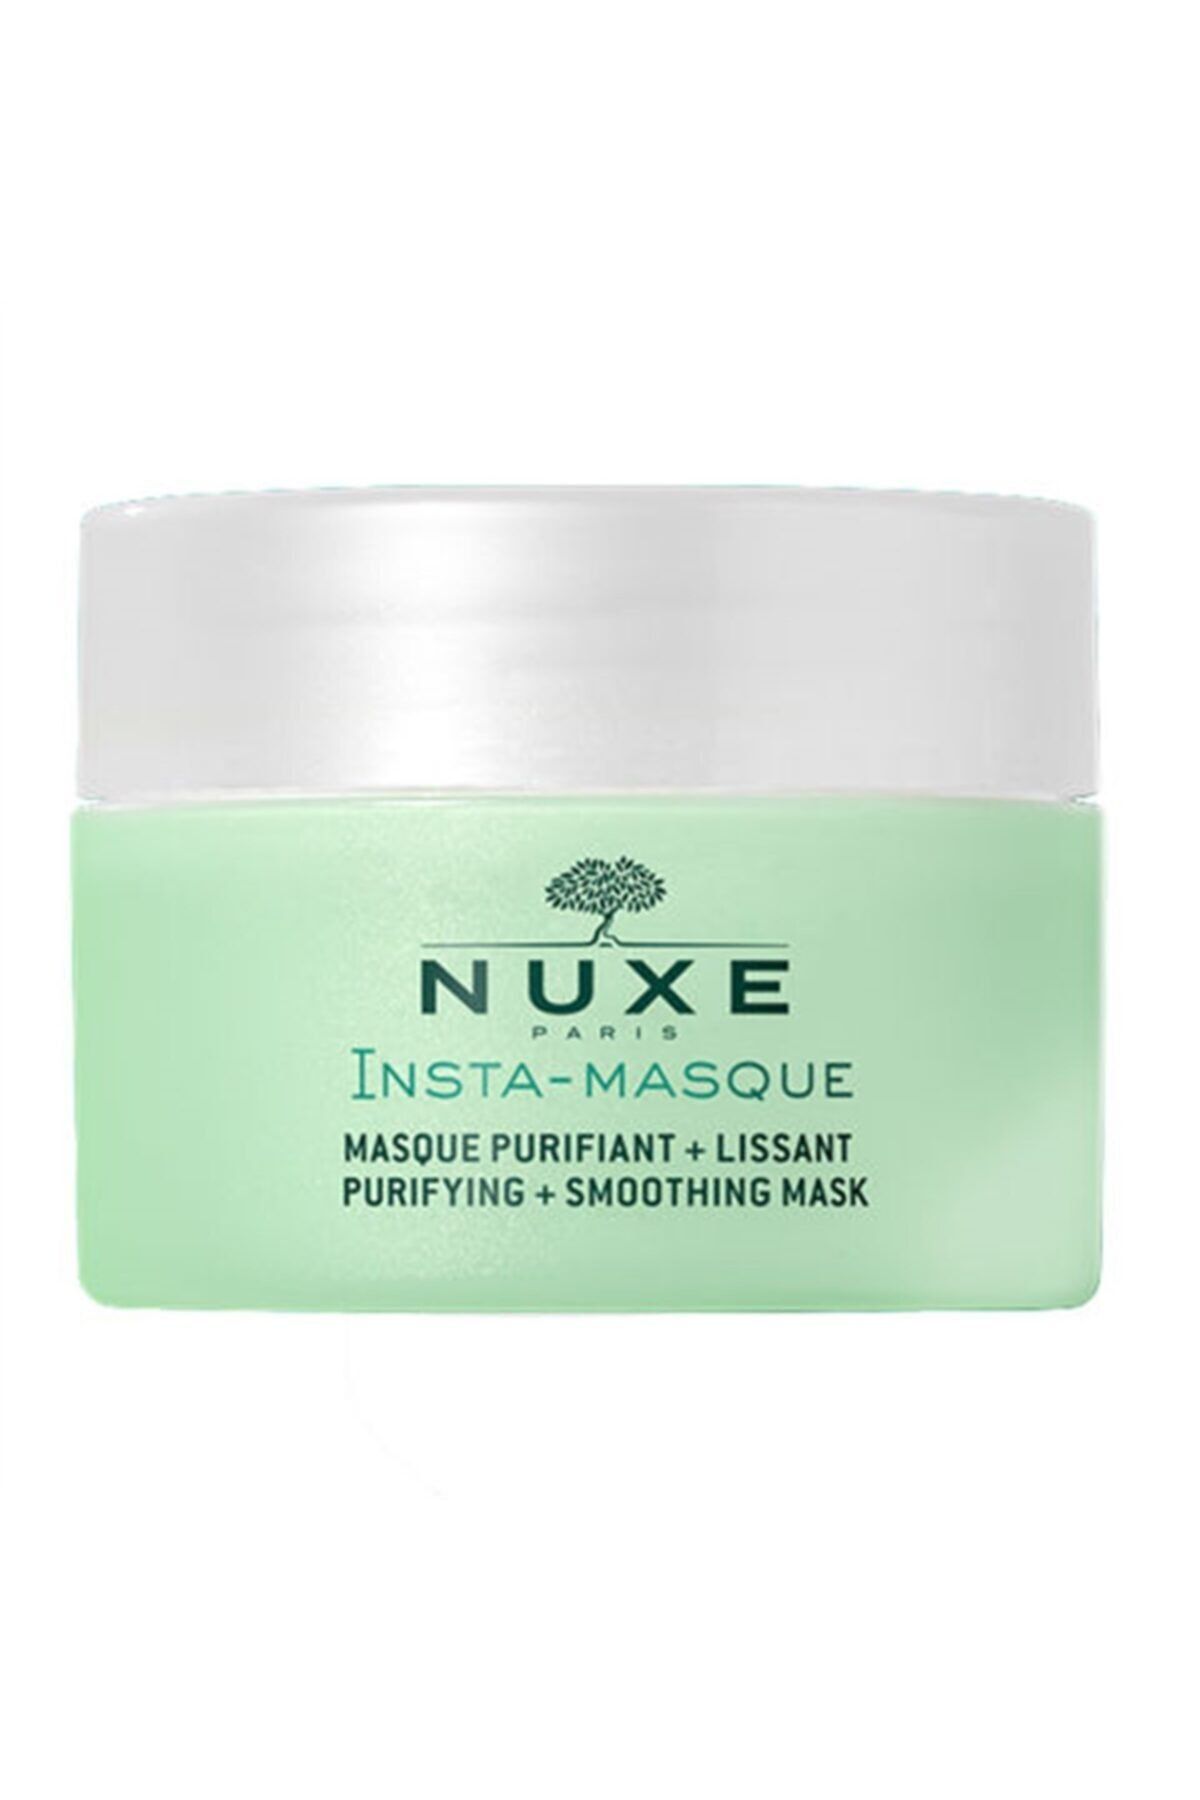 Nuxe Insta-masque Purifying + Smoothing Mask 50ml